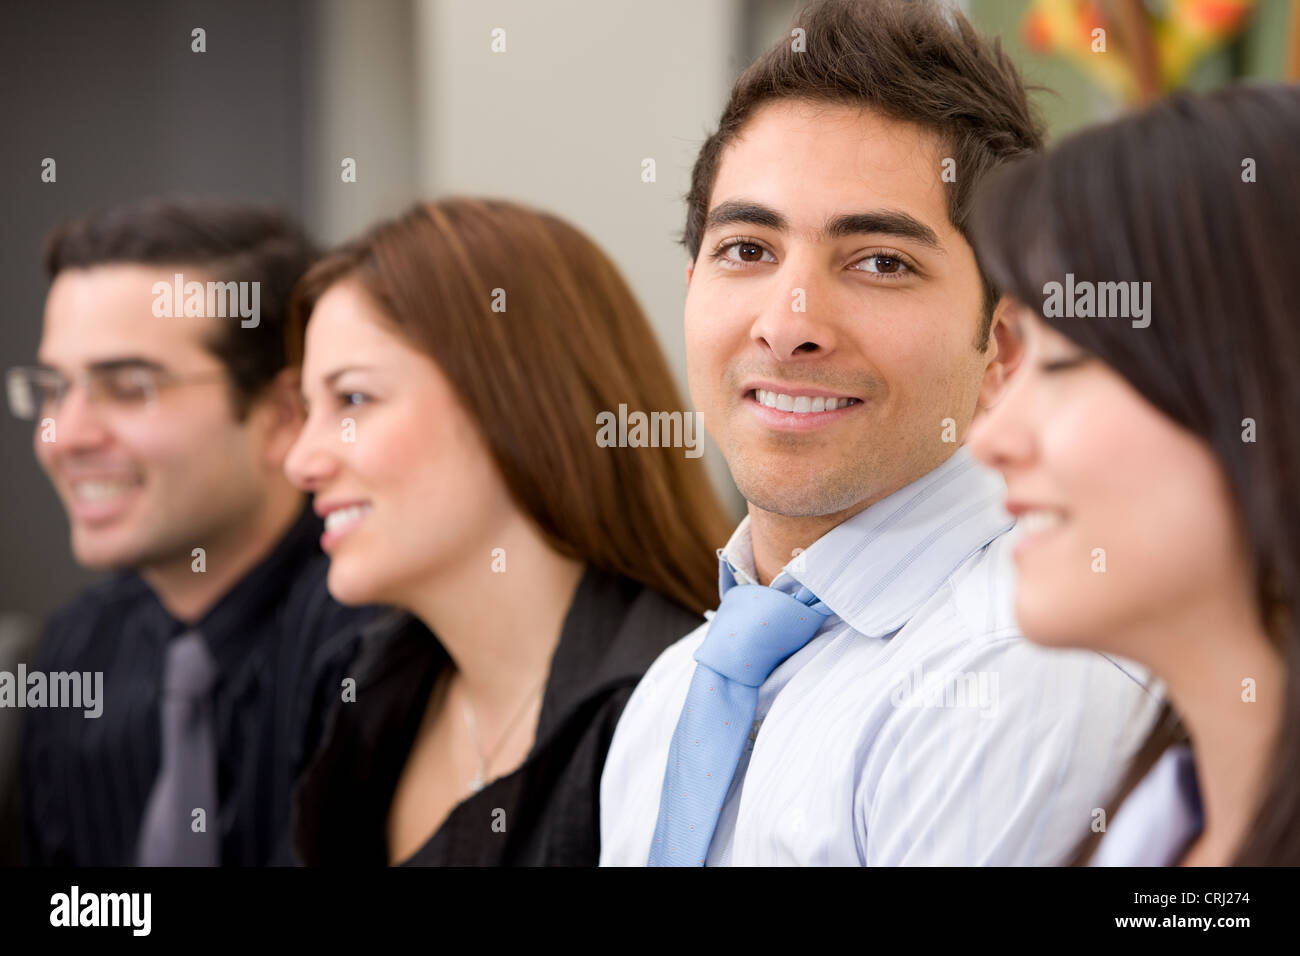 four smiling well-goomed young people, business man smiling ito the camera Stock Photo